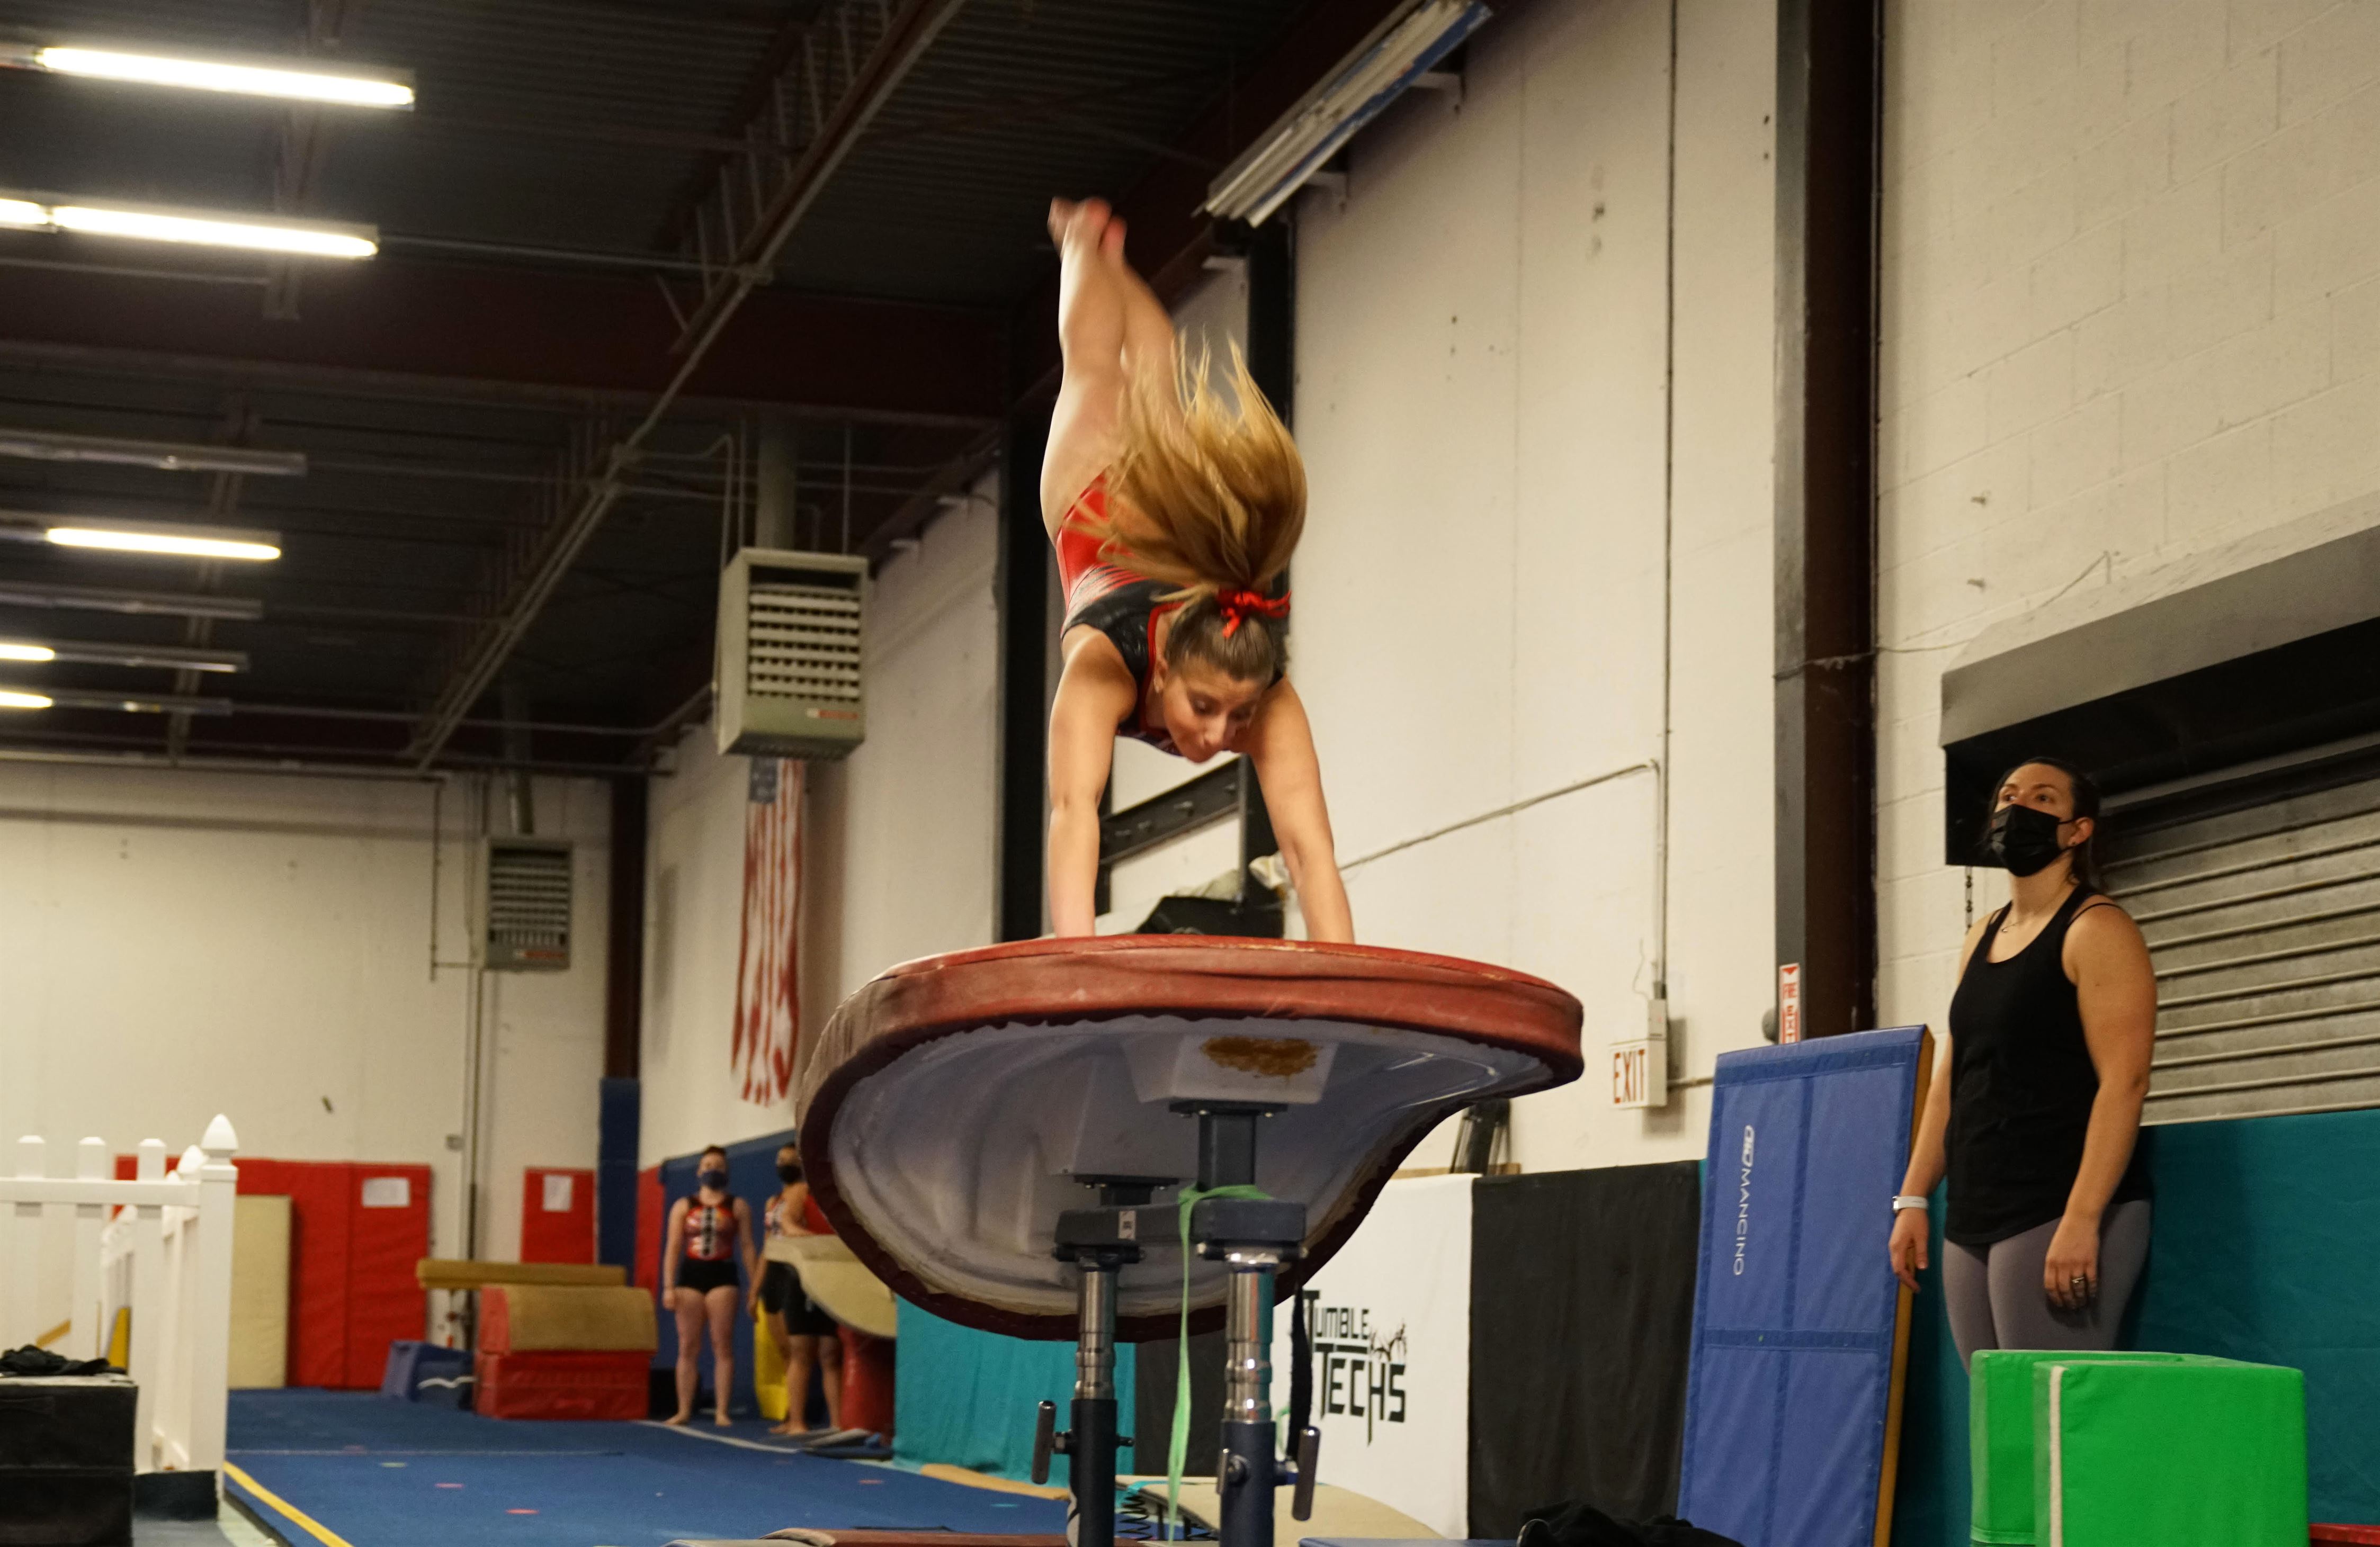 Hannah Goldhaber performs on a vault during a meet. Photo courtesy of Montclair State Club Gymnastics